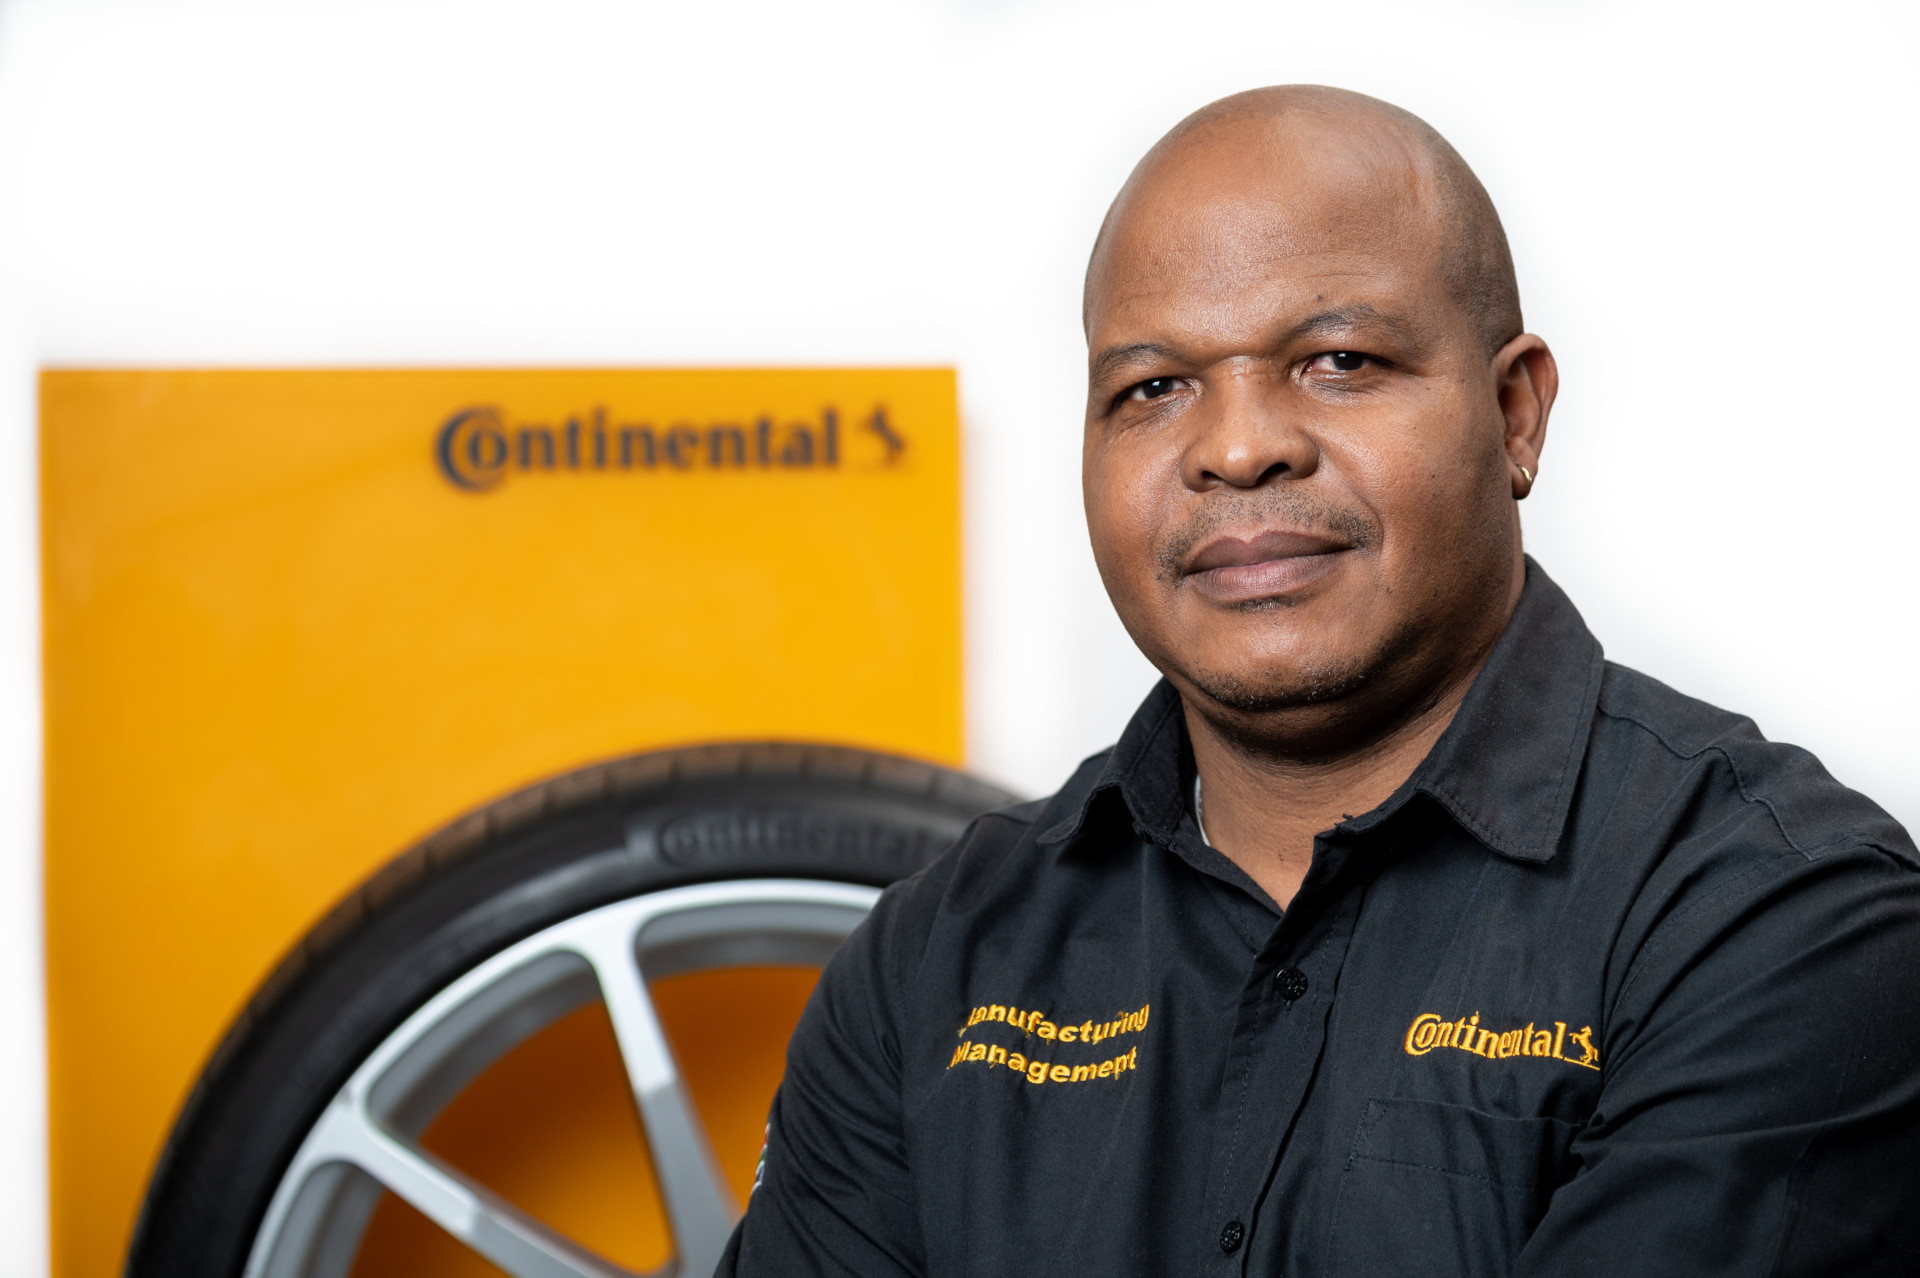 Plant Manager for Continental Tyre South Africa: Ramoabi Moeng